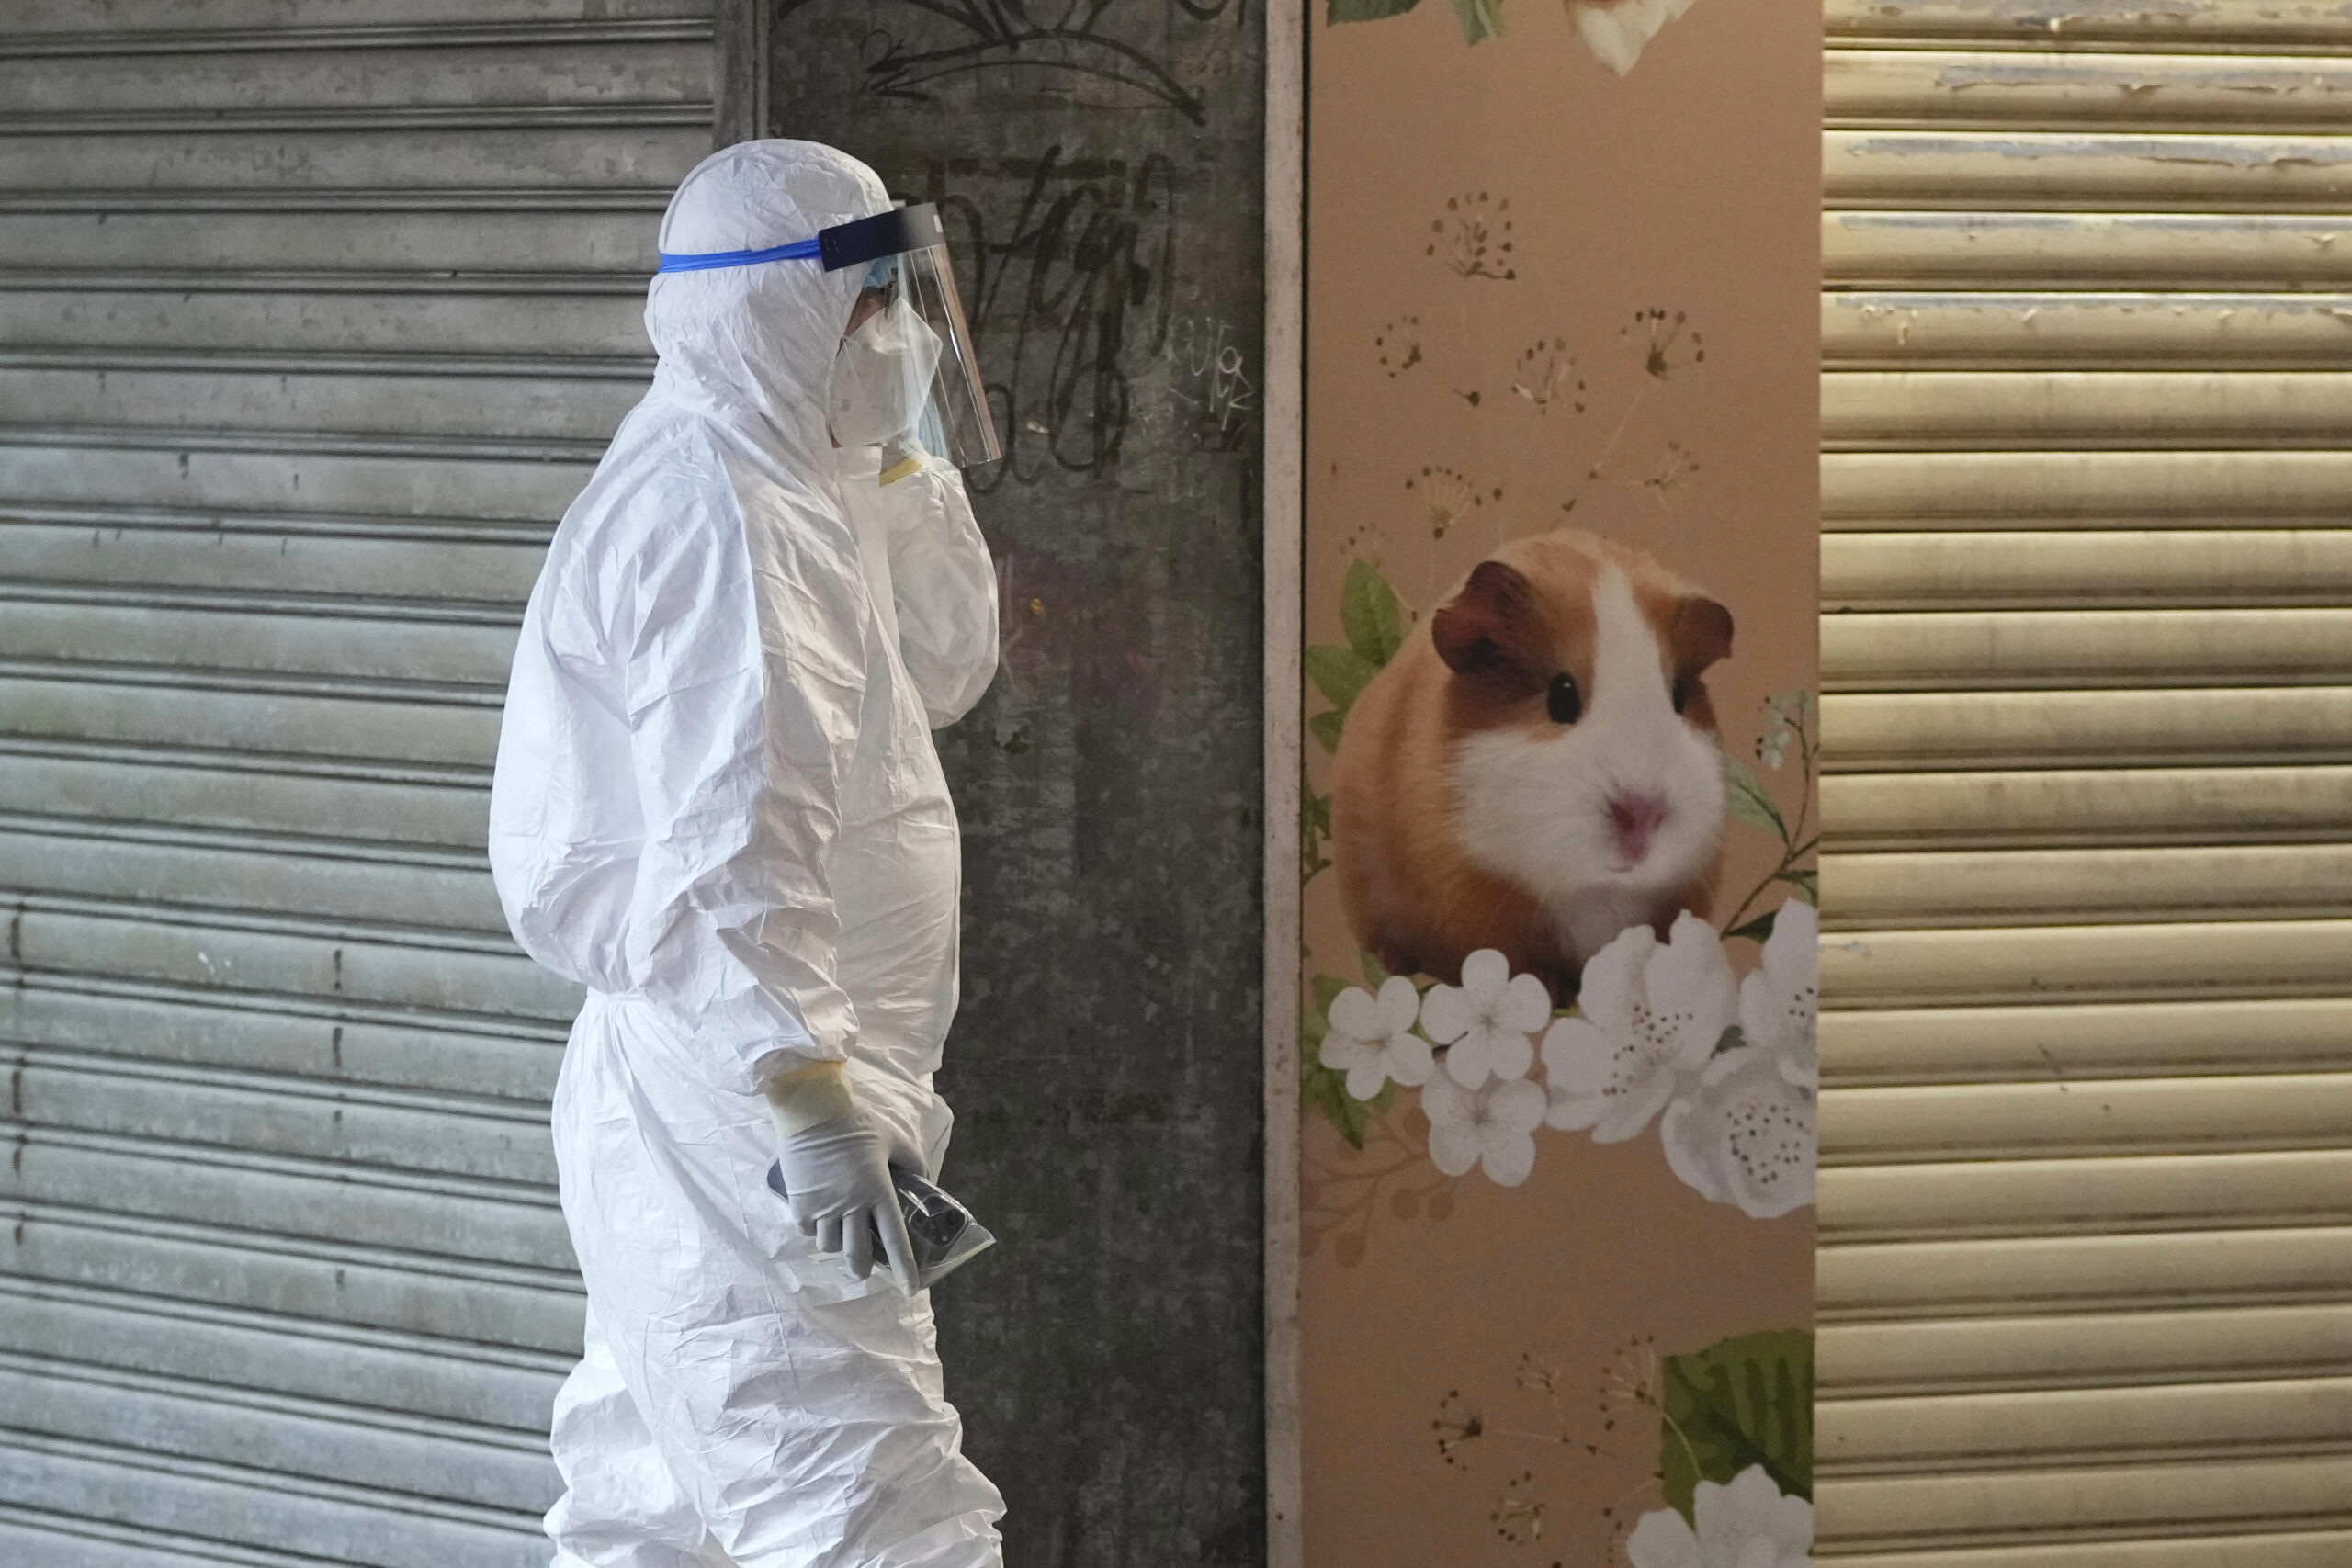 CORRECTS TO SAY 2,000 SMALL ANIMALS, NOT 2,000 HAMSTERS - A staffer from the Agriculture, Fisheries and Conservation Department walks past a pet shop which was closed after some pet hamsters were, authorities said, tested positive for the coronavirus, in Hong Kong, Tuesday, Jan. 18, 2022. Hong Kong authorities said Tuesday that they will kill about 2,000 small animals, including hamsters, after several tested positive for the coronavirus at the pet store where an employee was also infected. (AP Photo/Kin Cheung)